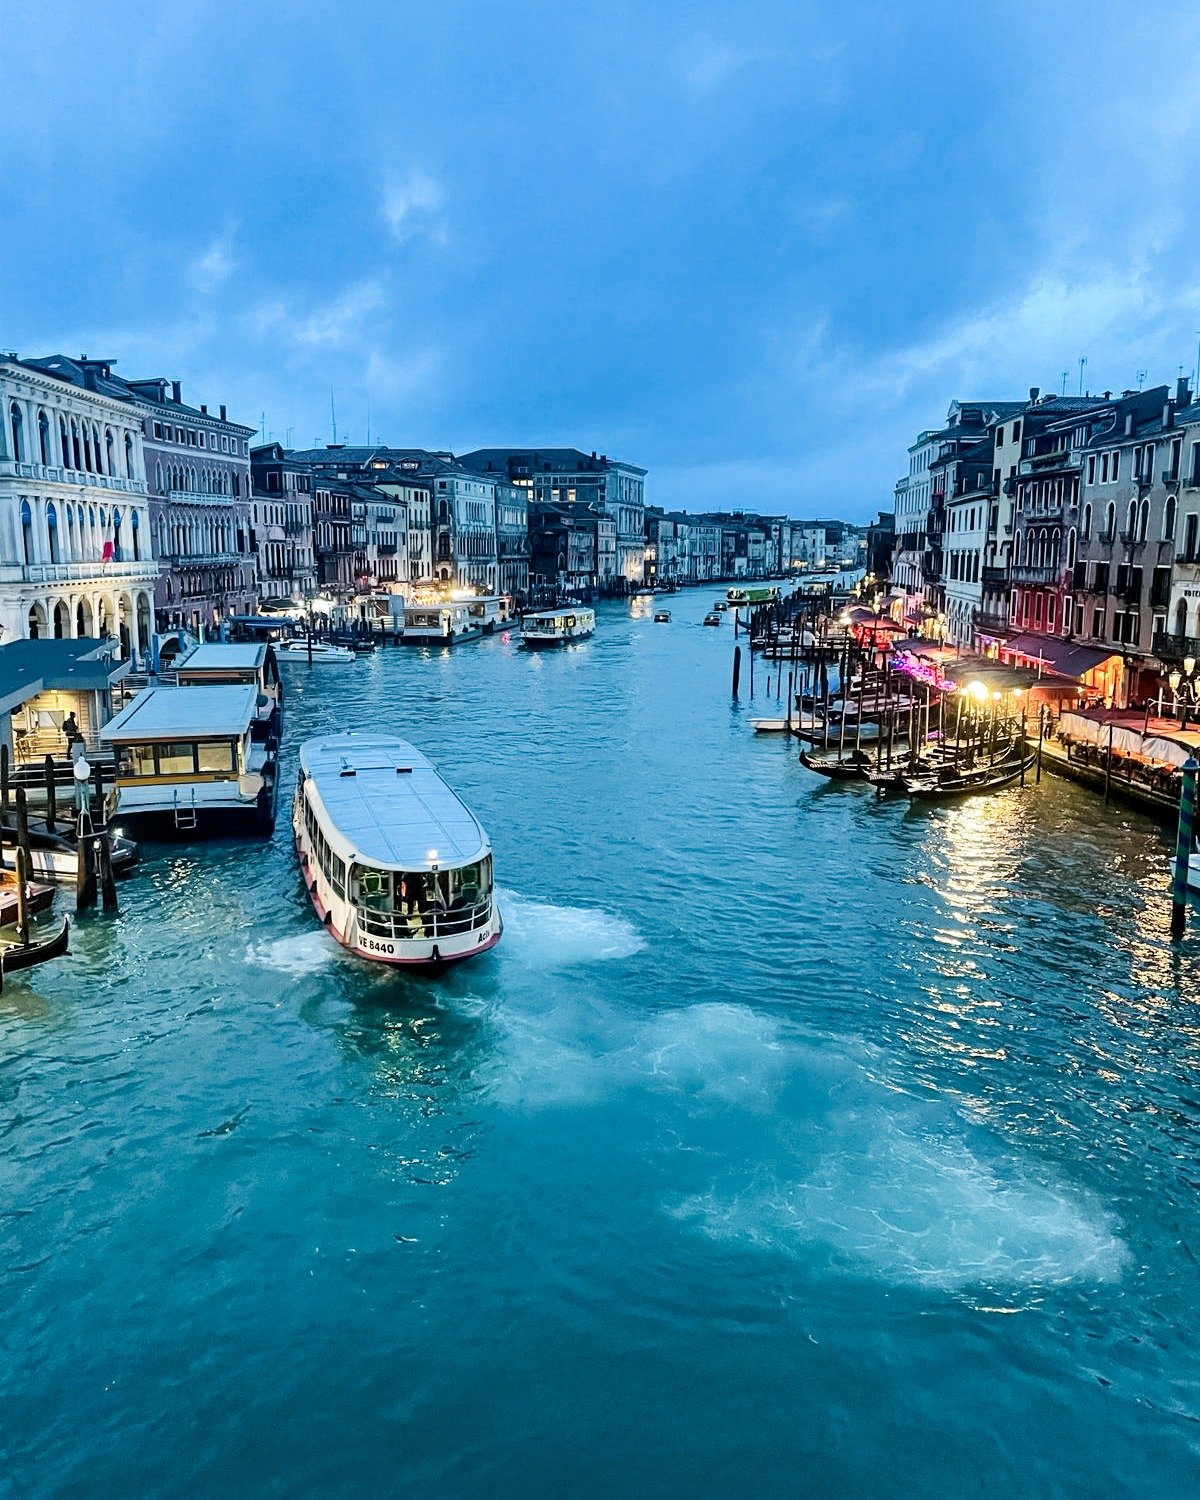 🚤 SAVE this for your future trip to VENICE 🚤

Venice on a budget: family fun without breaking the bank!

ACCOMMODATION
You could stay in Mestre where accommodation options are much cheaper and it is only a short train ride into Venice. In the city 